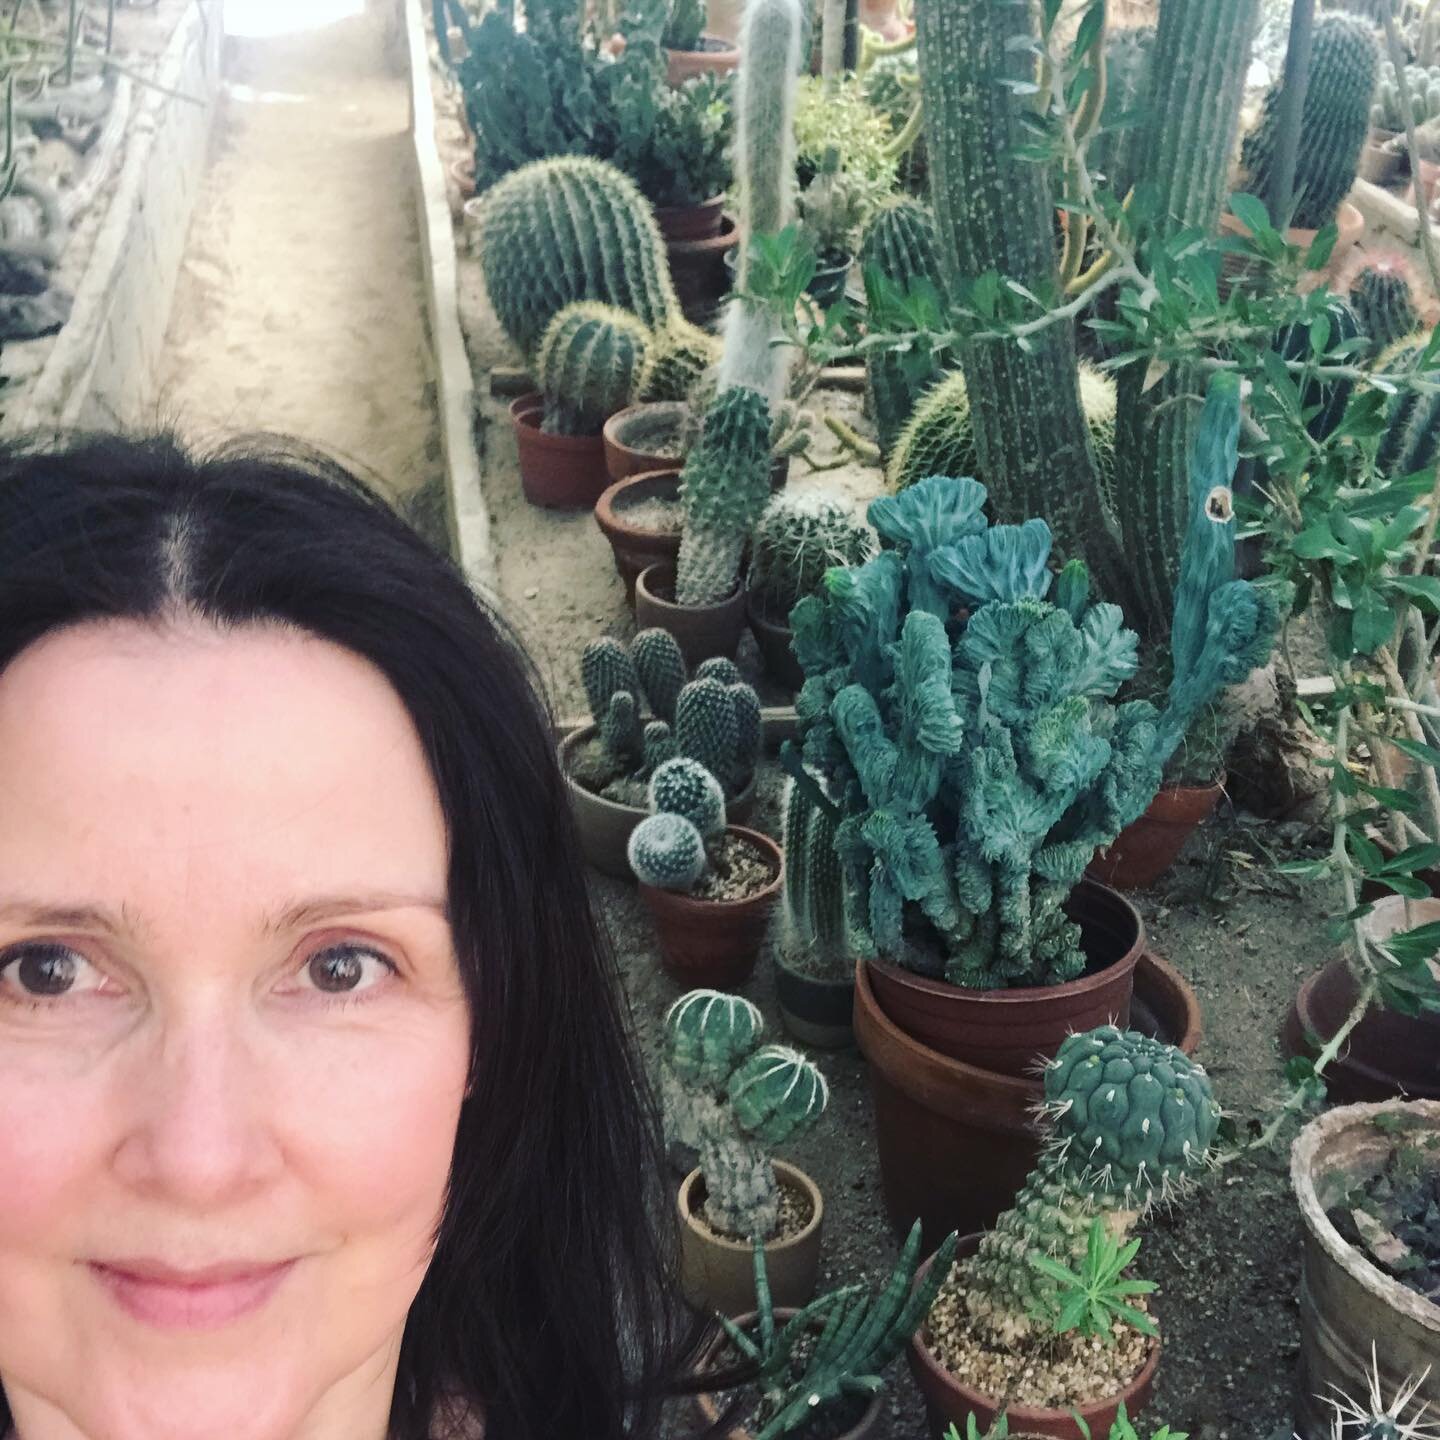 In California for a few days with my sister to attend Coachella and couldn&rsquo;t resist popping in to the wonderful Moorten&rsquo;s cactarium, which would be Susan Green&rsquo;s idea of paradise on earth 🌵🌺☀️
#thecactus #moortenbotanicalgarden